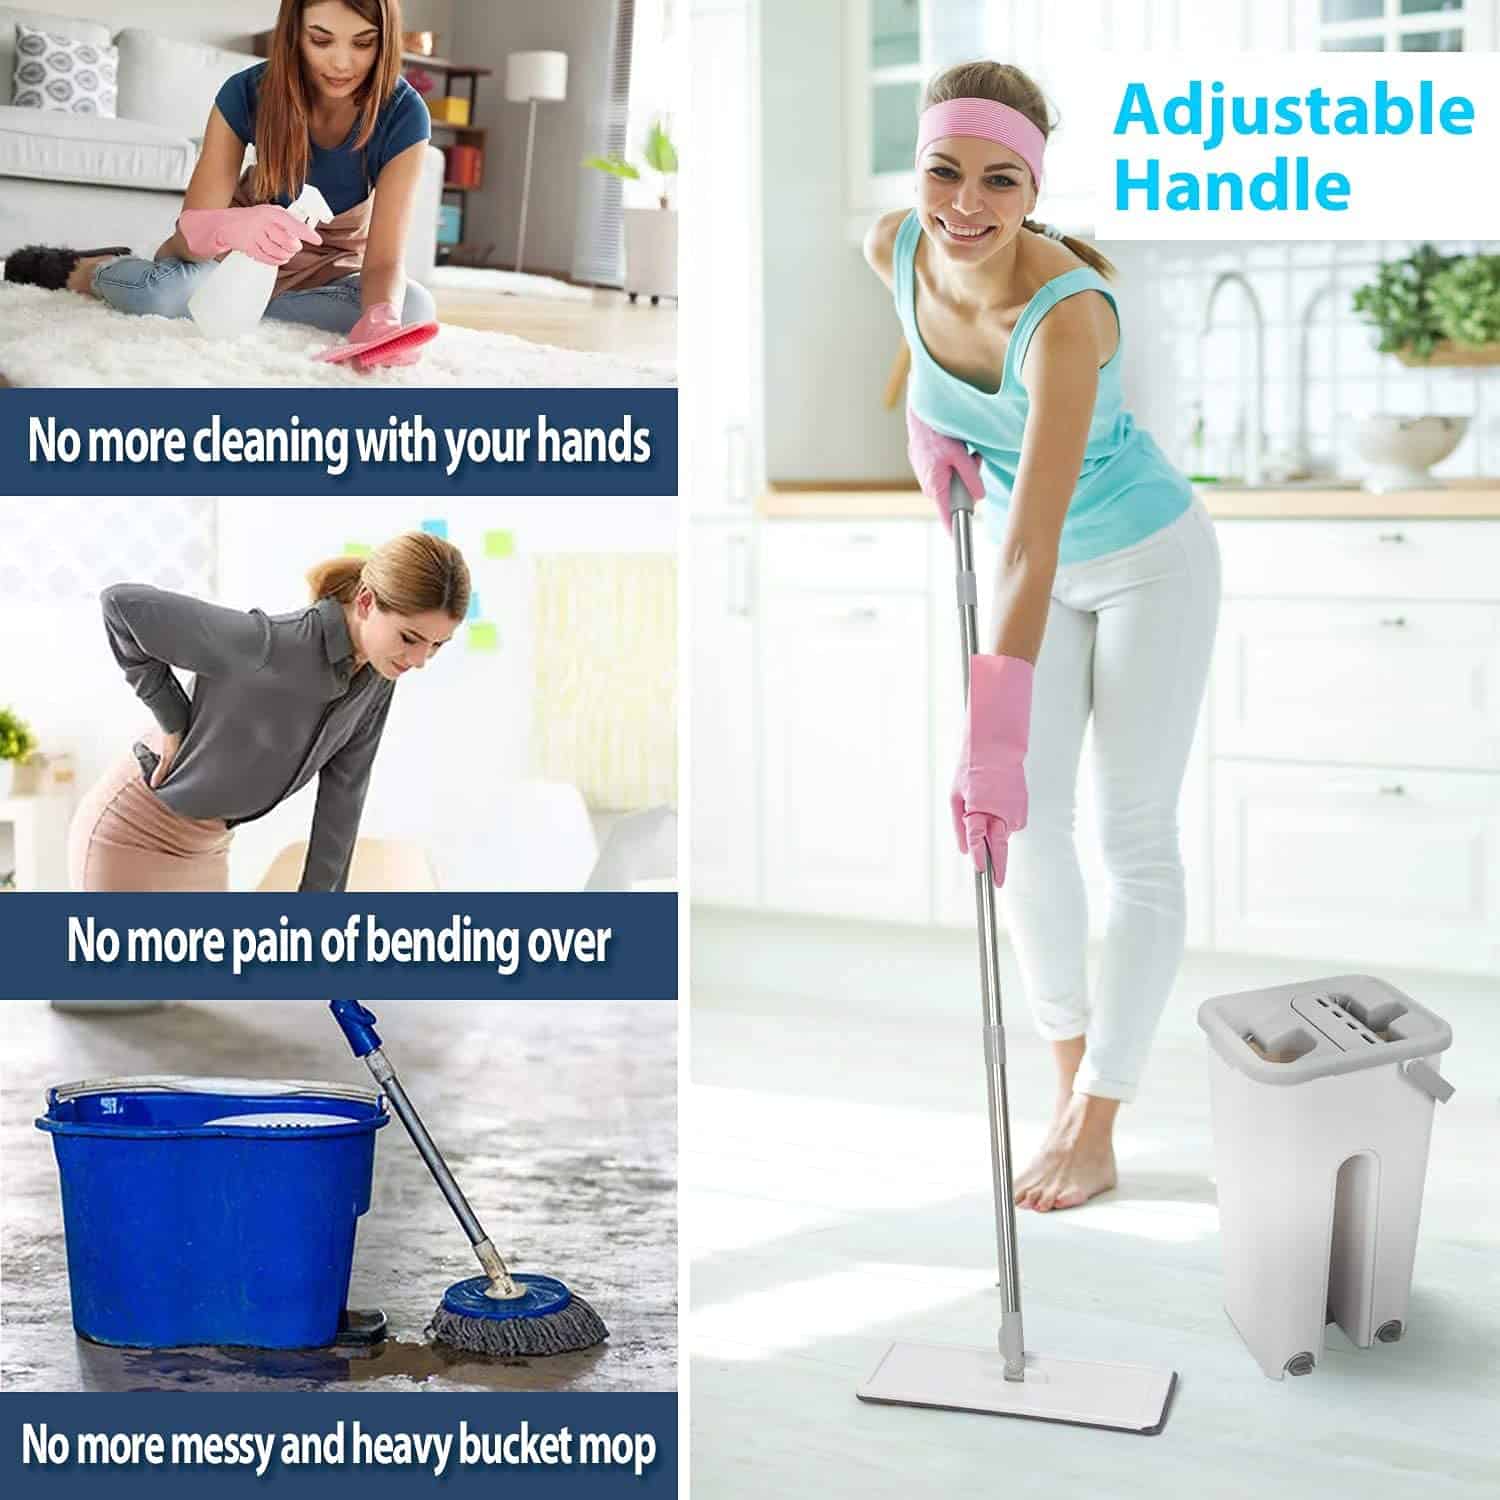 Housekeeping Carts with Microfiber Flat-Mop Tub Systems